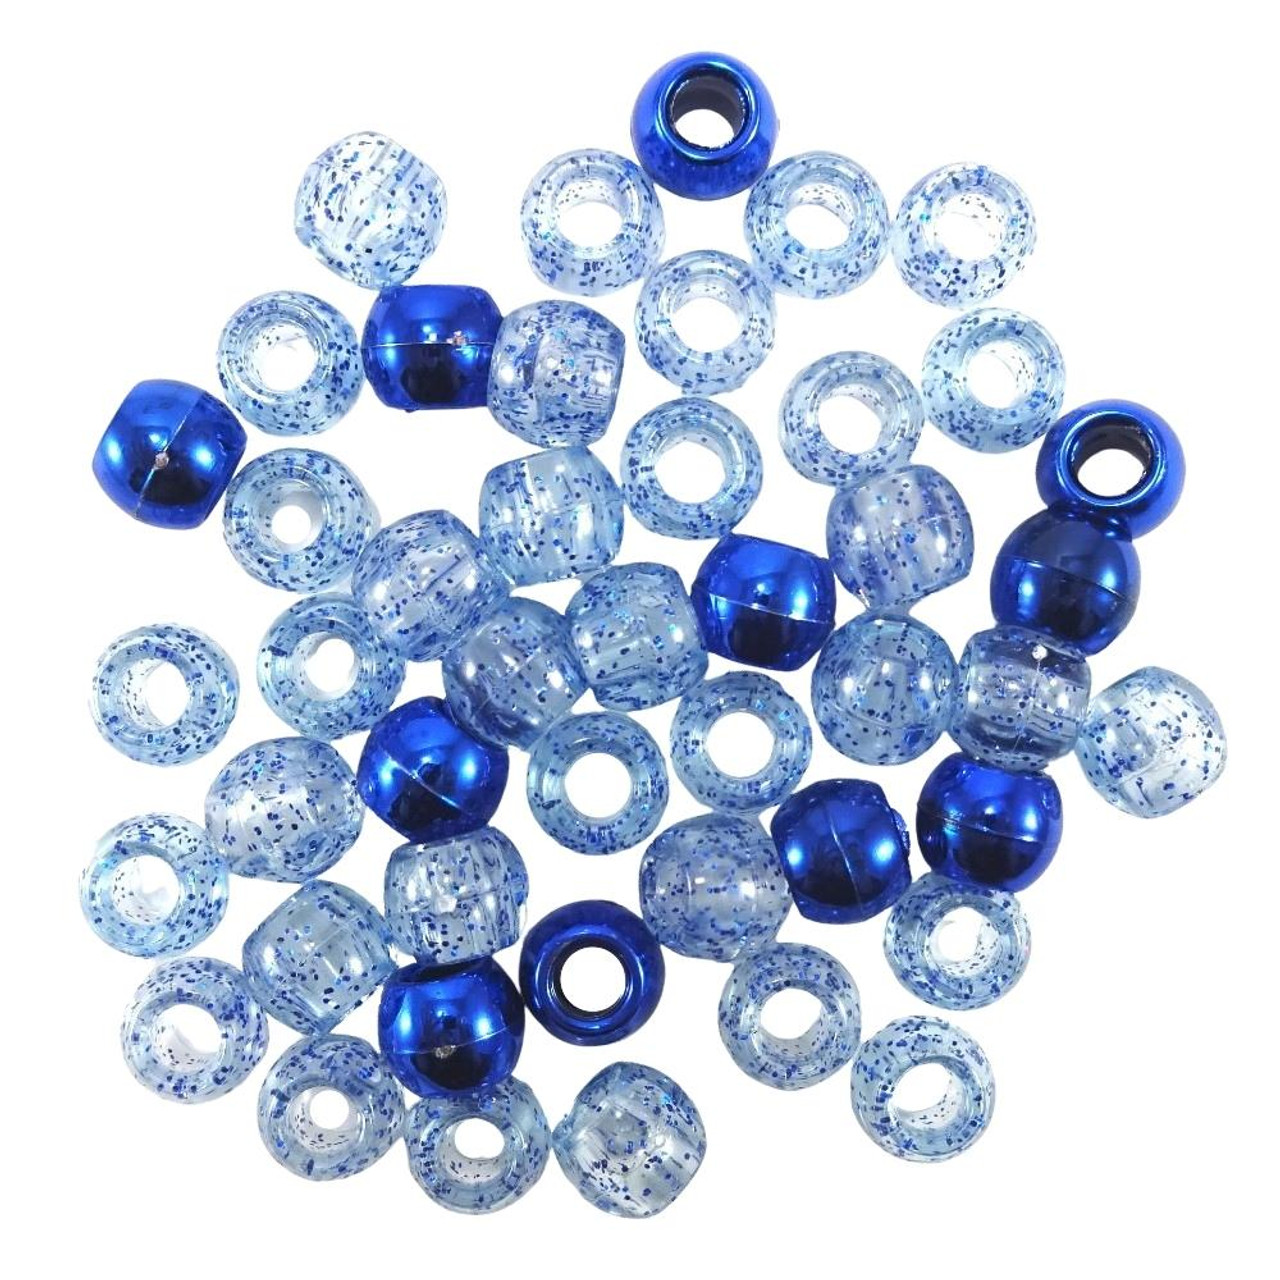 Extreme Blue Hair Feathers and Beads Kit 10